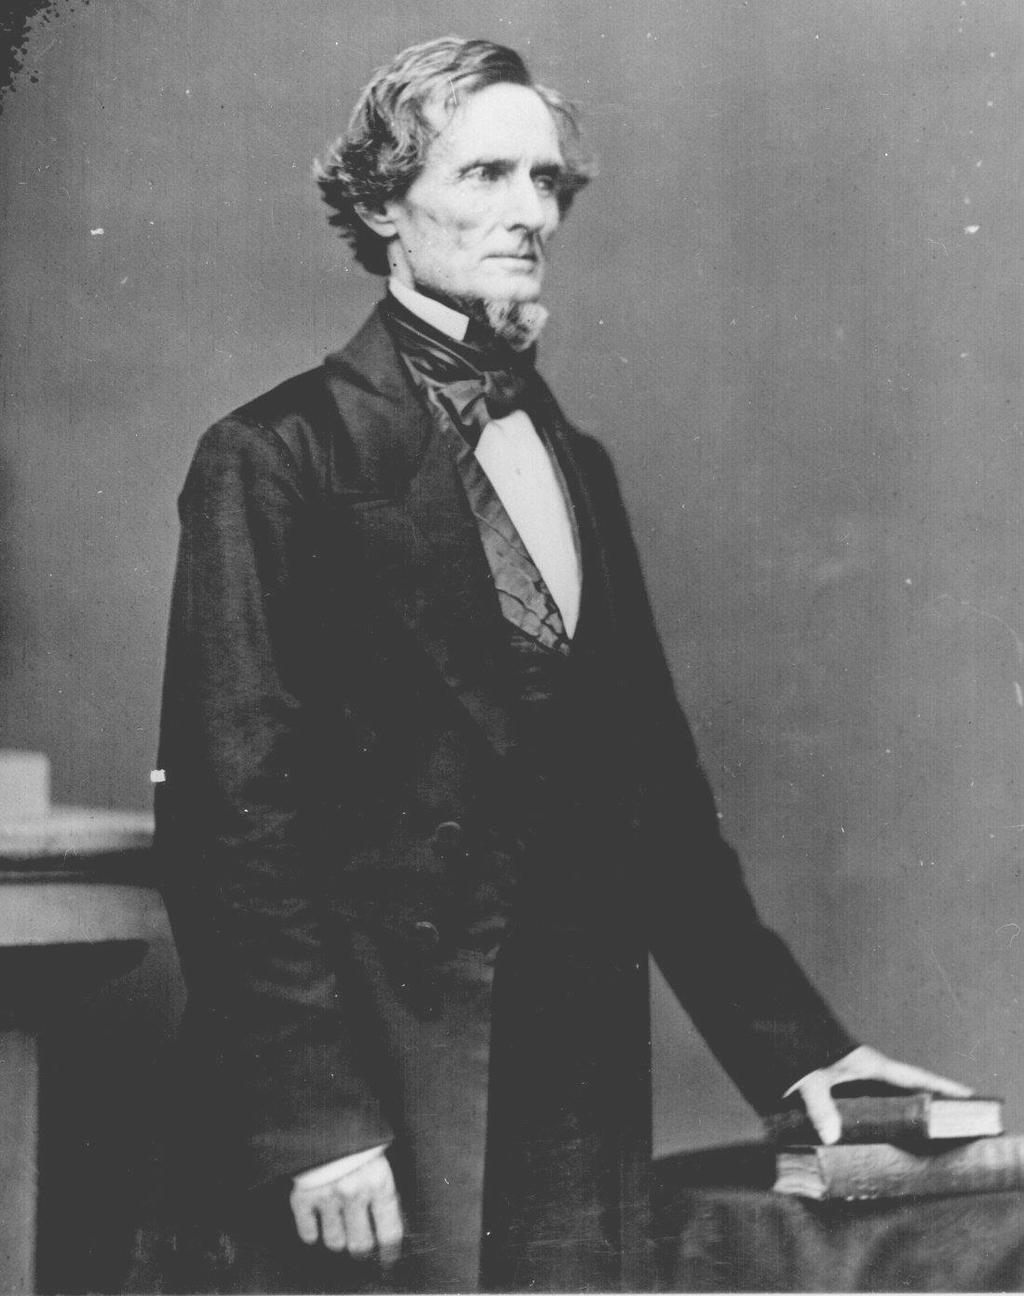 JEFFERSON DAVIS WAS THE PRESIDENT OF THE CONFEDERATE STATES OF AMERICA FROM 1861-1865.